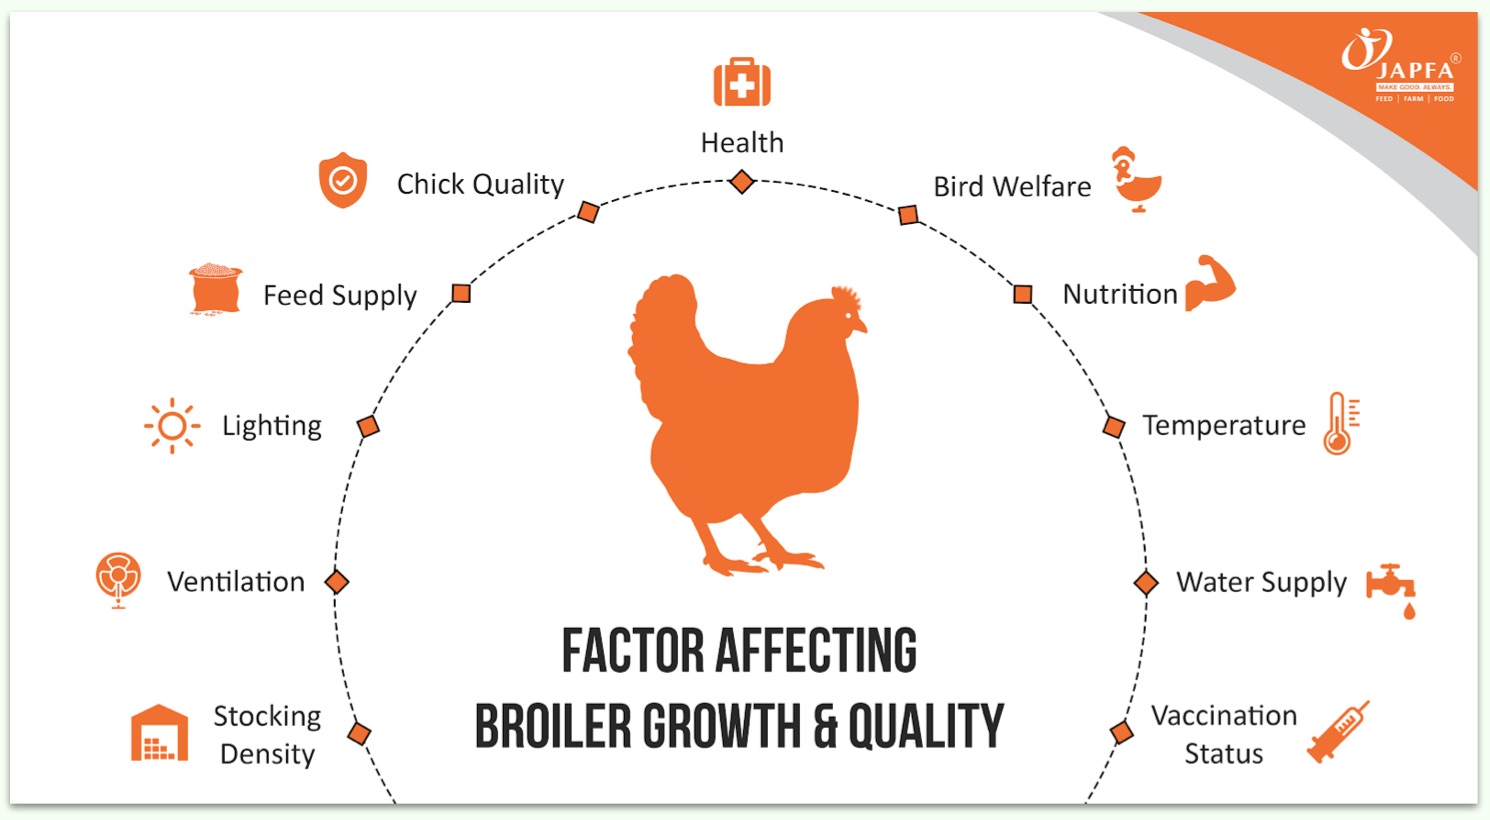 Factors Affecting Broiler Growth & Quality